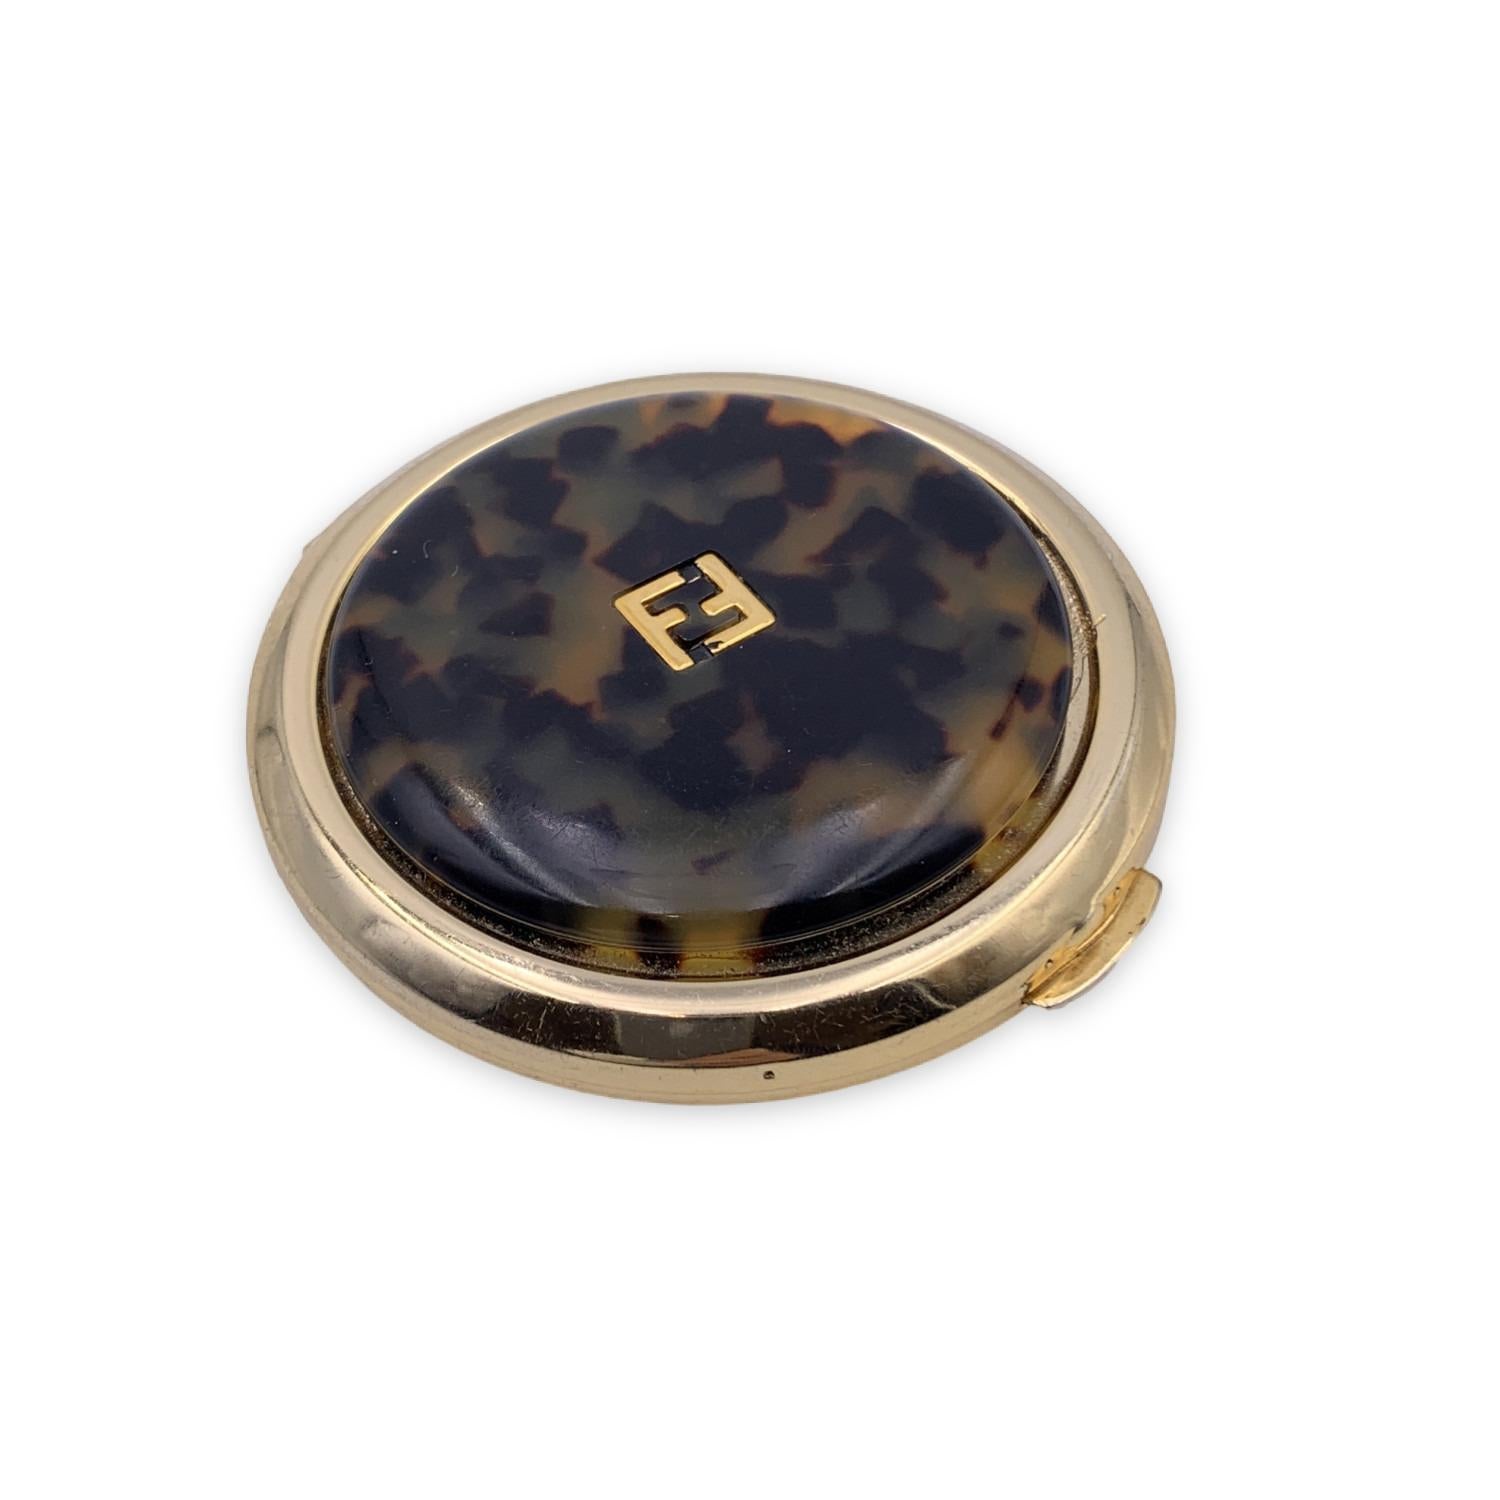 Vintage FENDI round compact mirrored Pocket Mirror in gold metal with havana lid. FF - FENDI logo on top. Snap closure. Measurements: Diameter: 3 inches - 7.6 cm.

Details

MATERIAL: Metal

COLOR: Gold

MODEL: -

GENDER: Women

COUNTRY OF